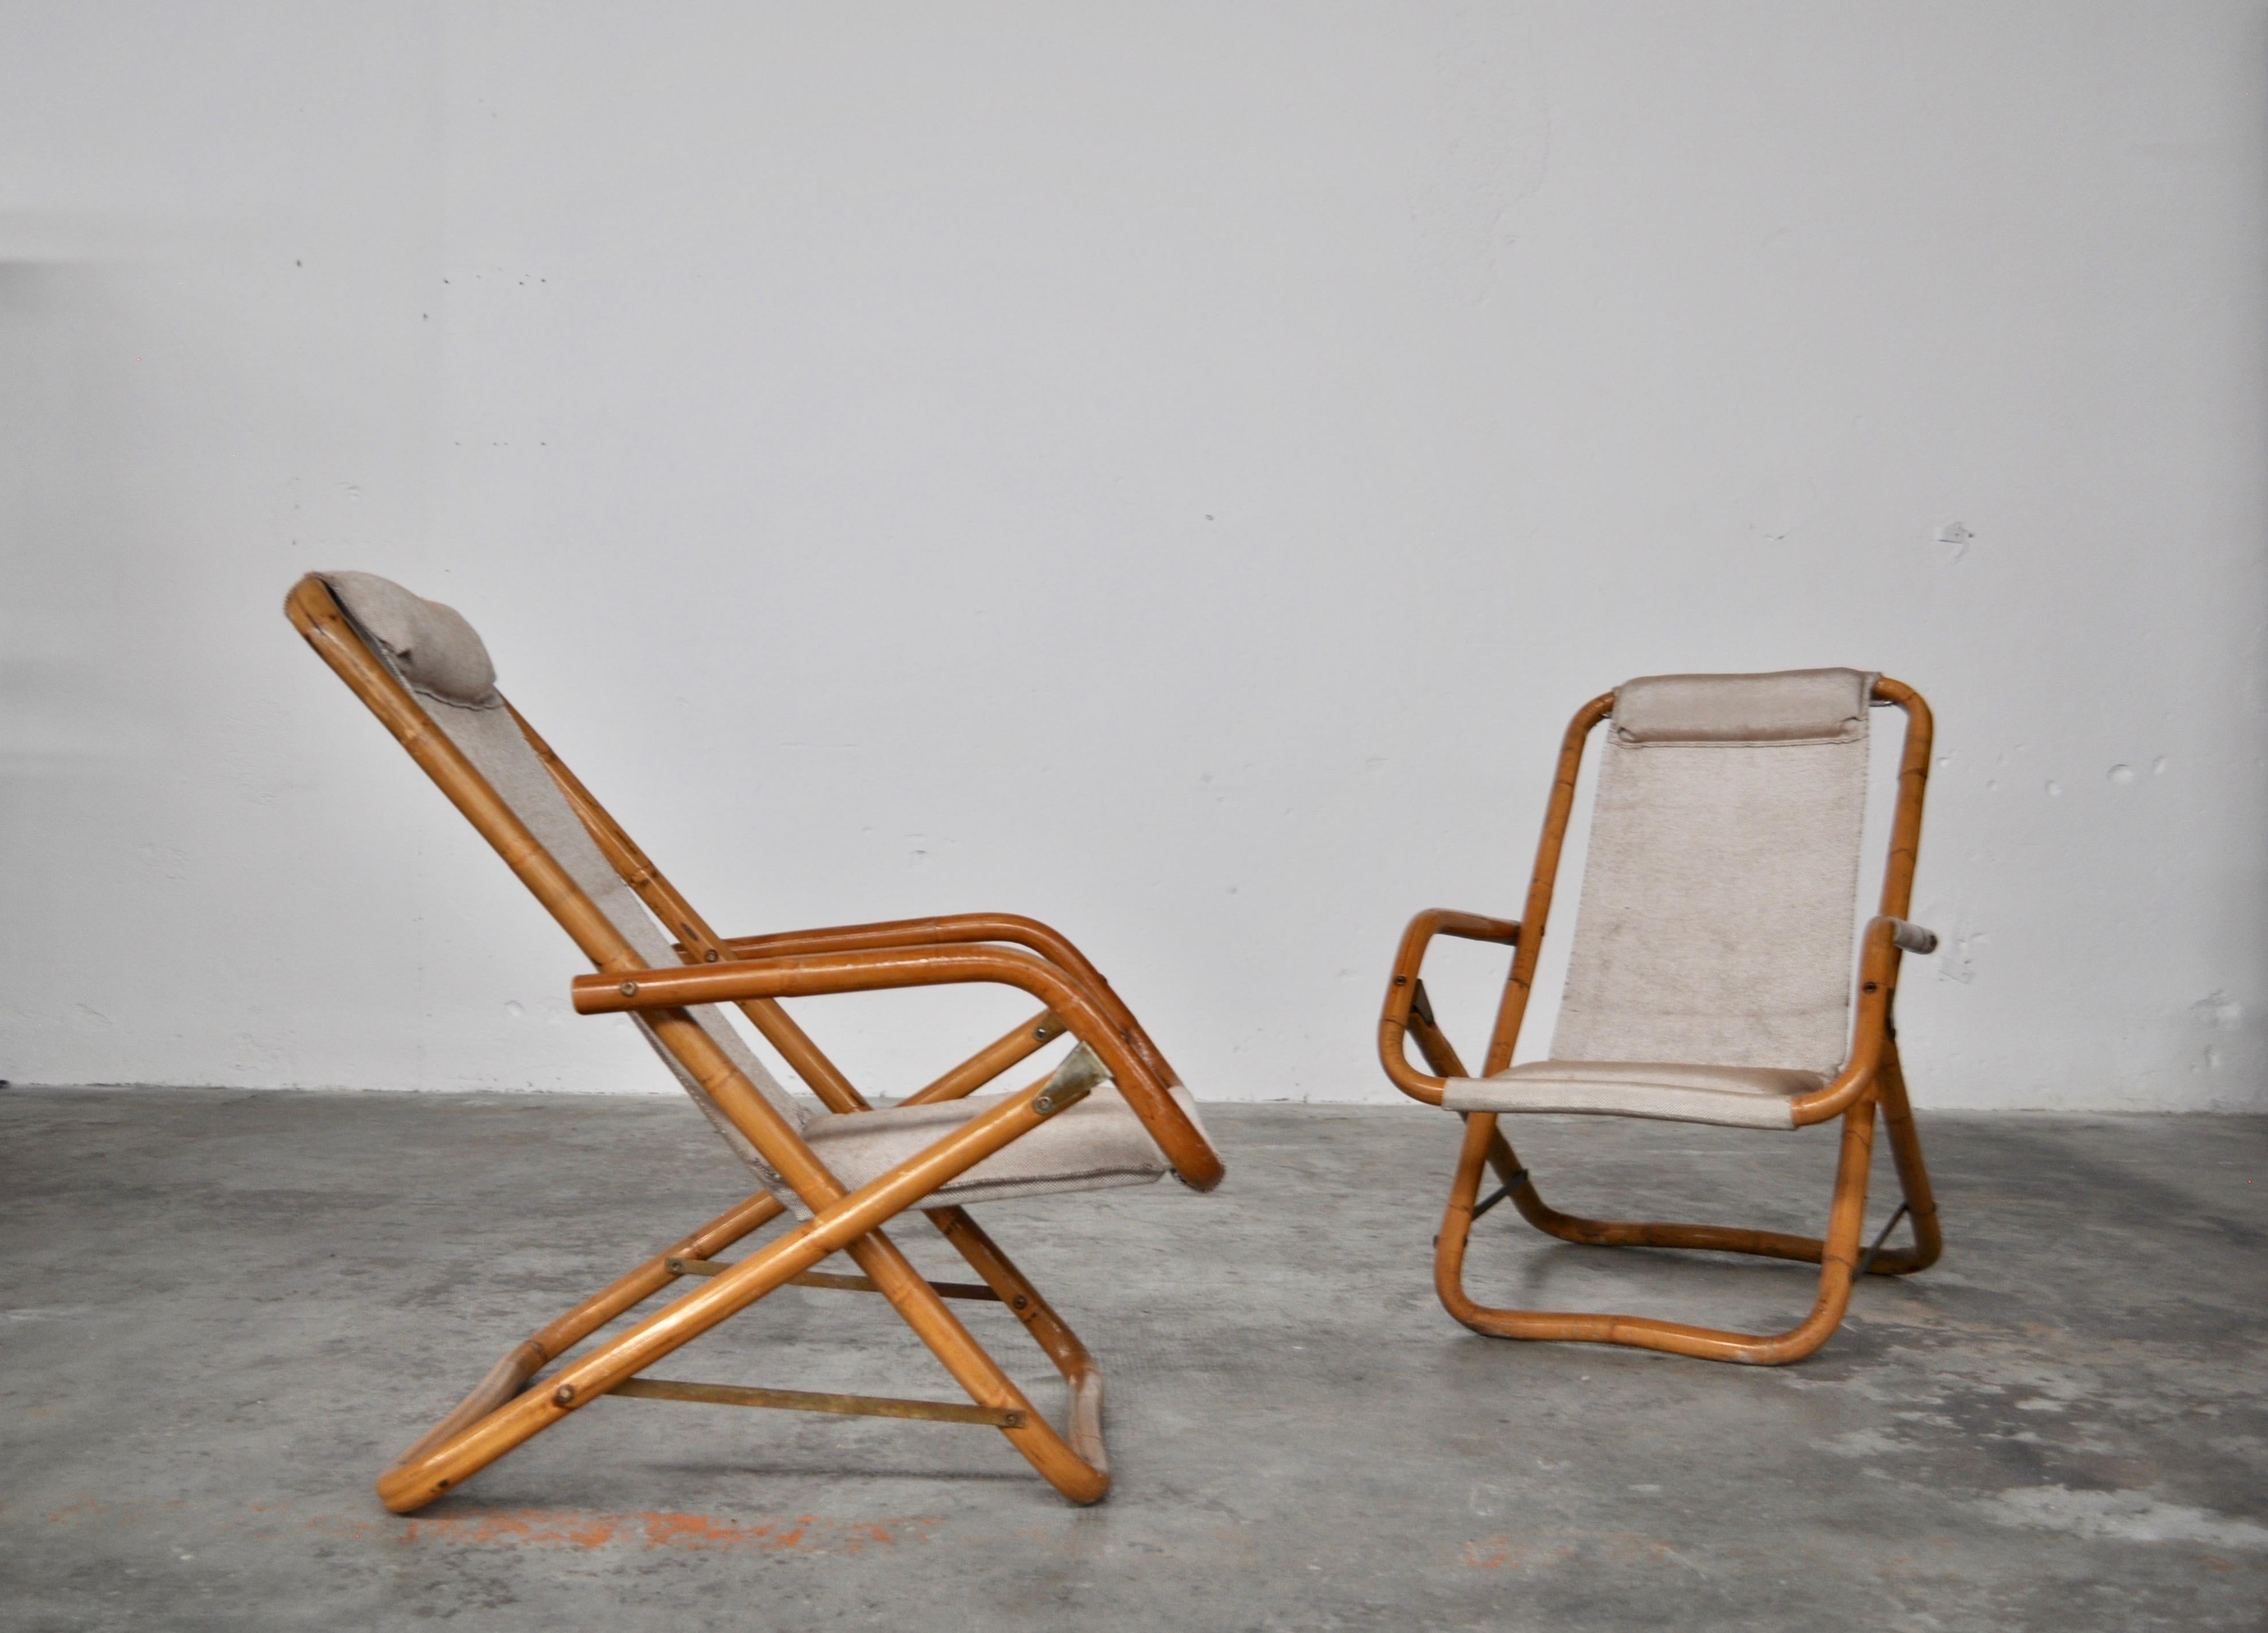 Italian Reclinable and Oscilanting Faux Bamboo Seats, Italy, 1960s For Sale